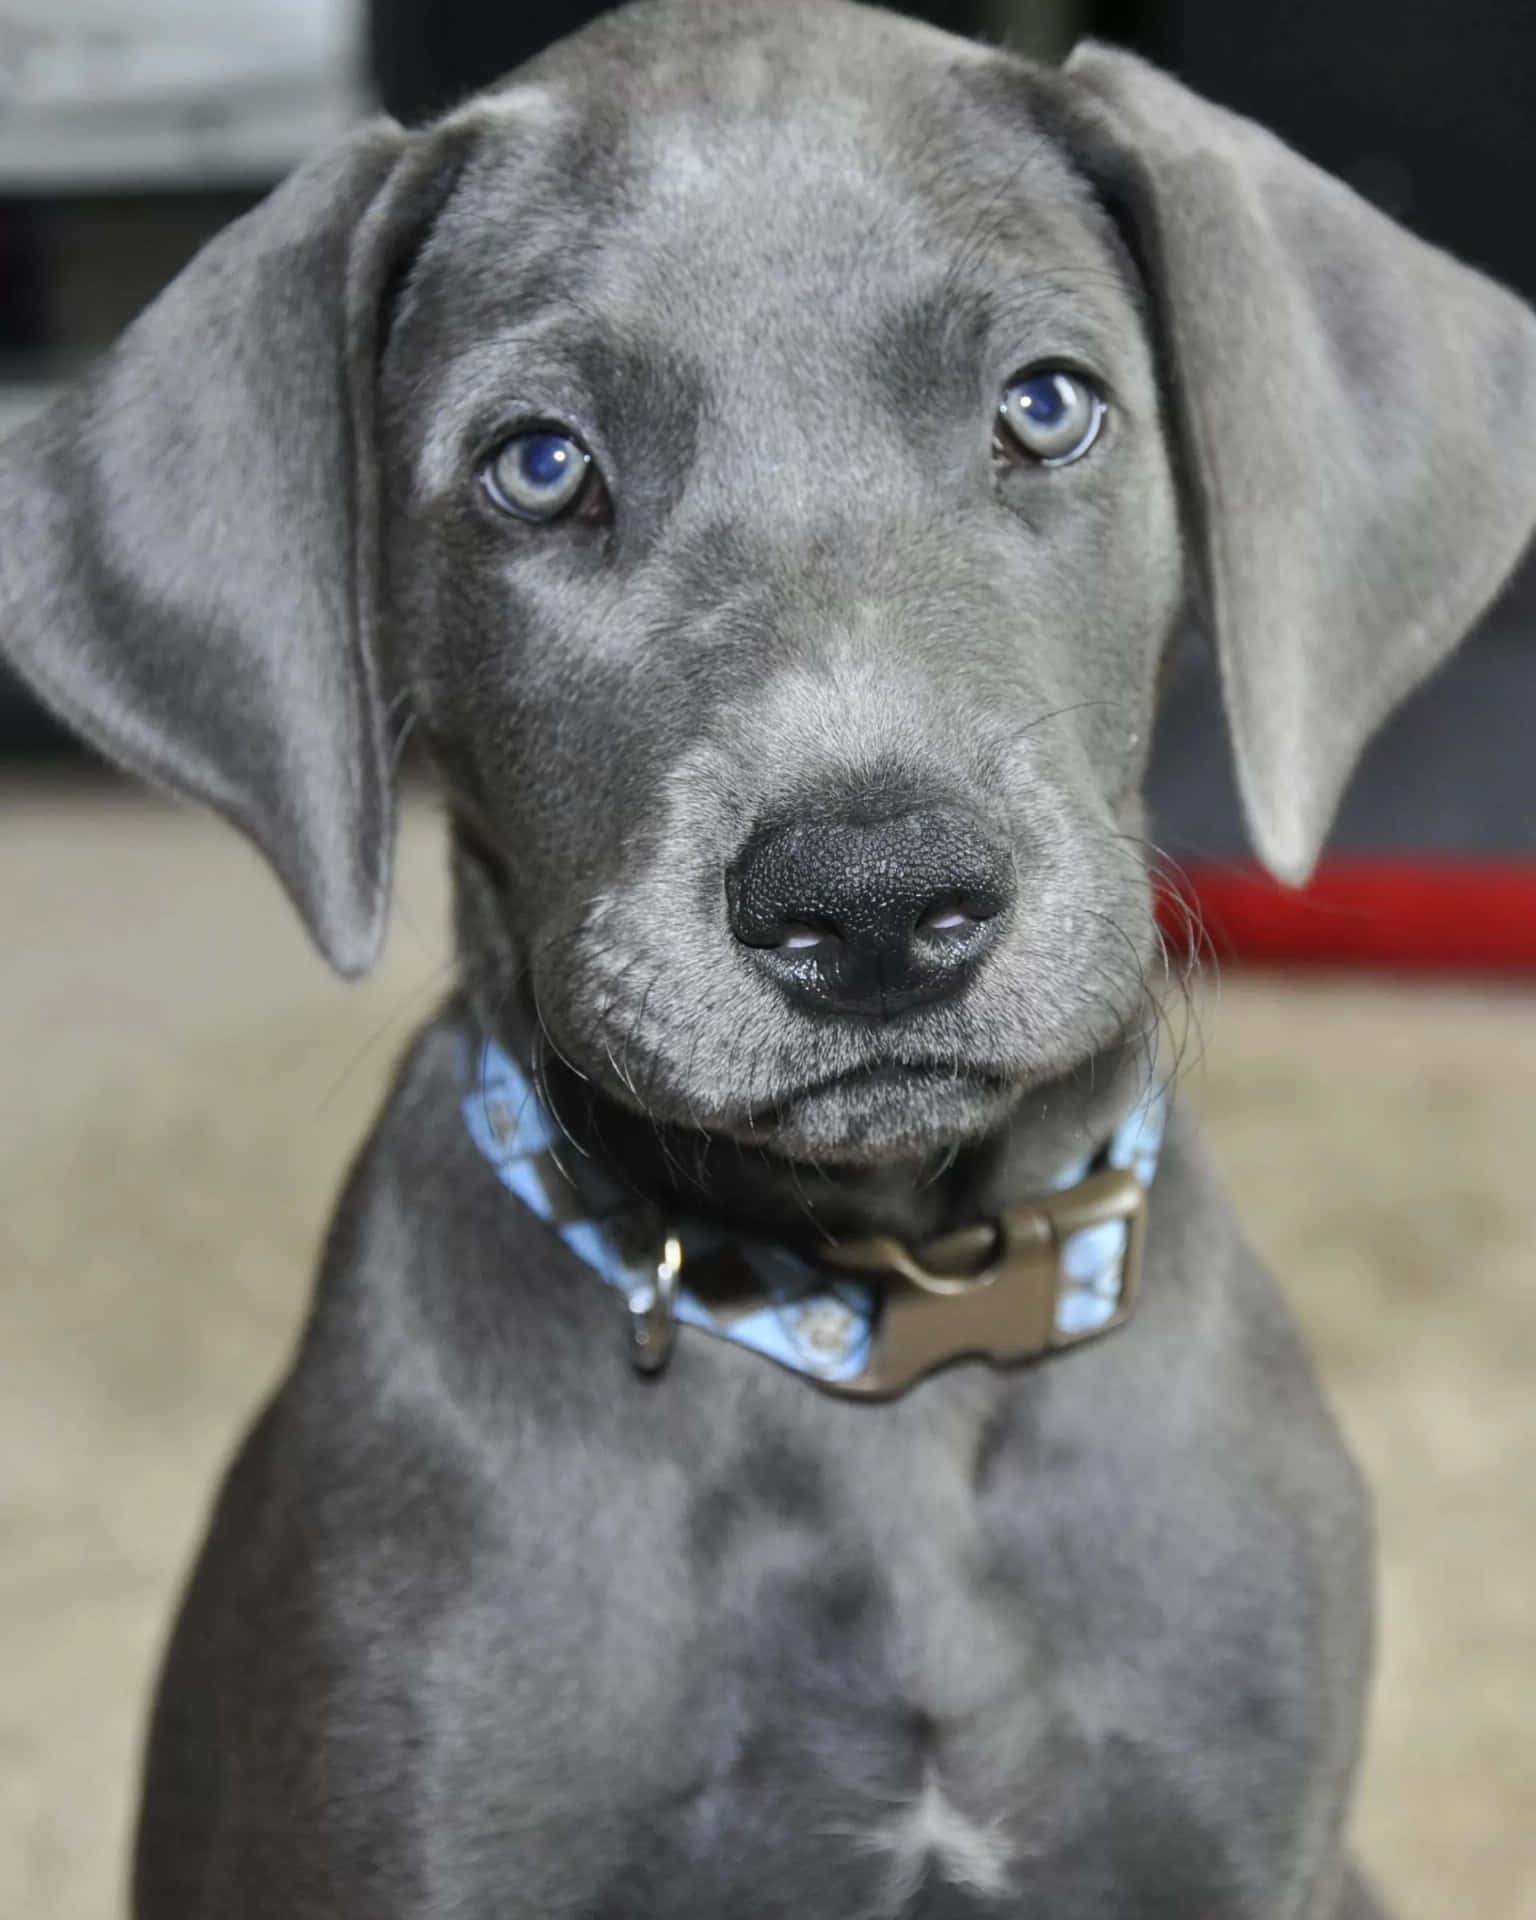 A Grey Puppy With Blue Eyes Is Sitting On The Floor